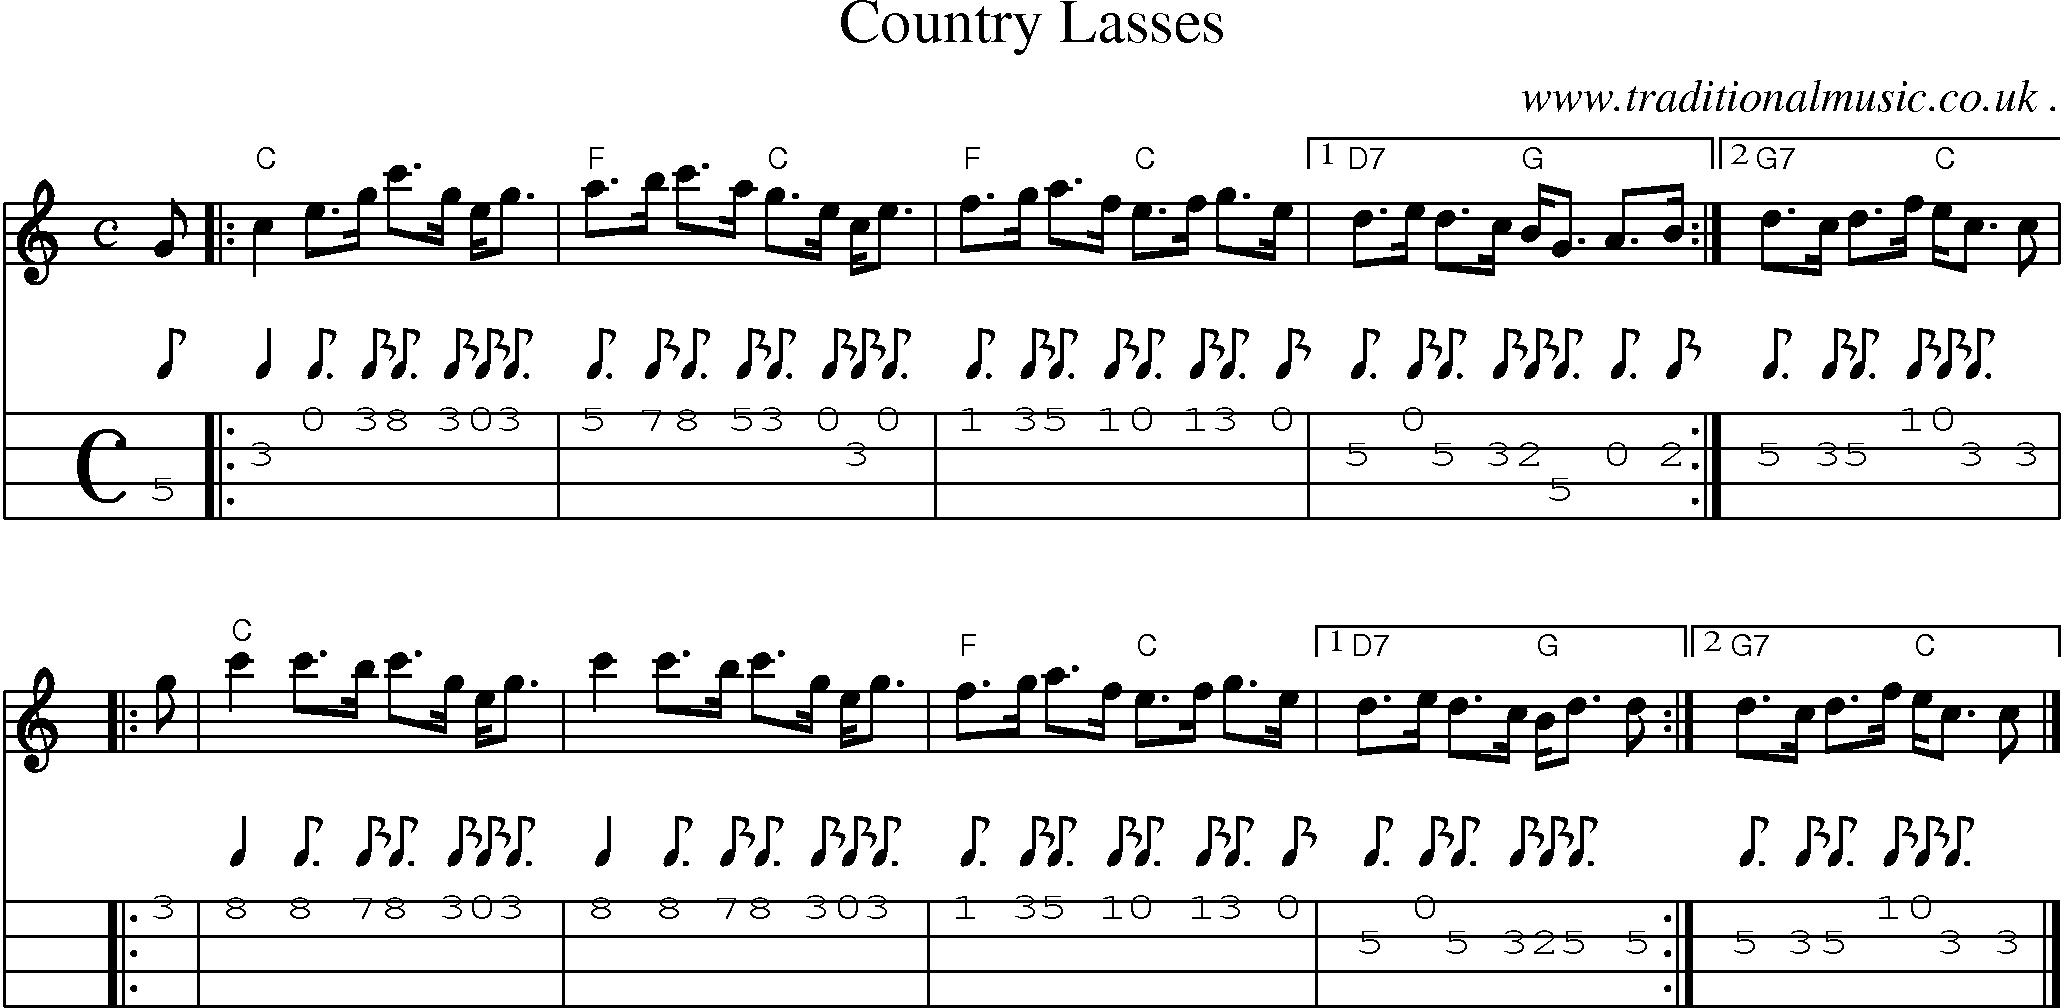 Sheet-music  score, Chords and Mandolin Tabs for Country Lasses